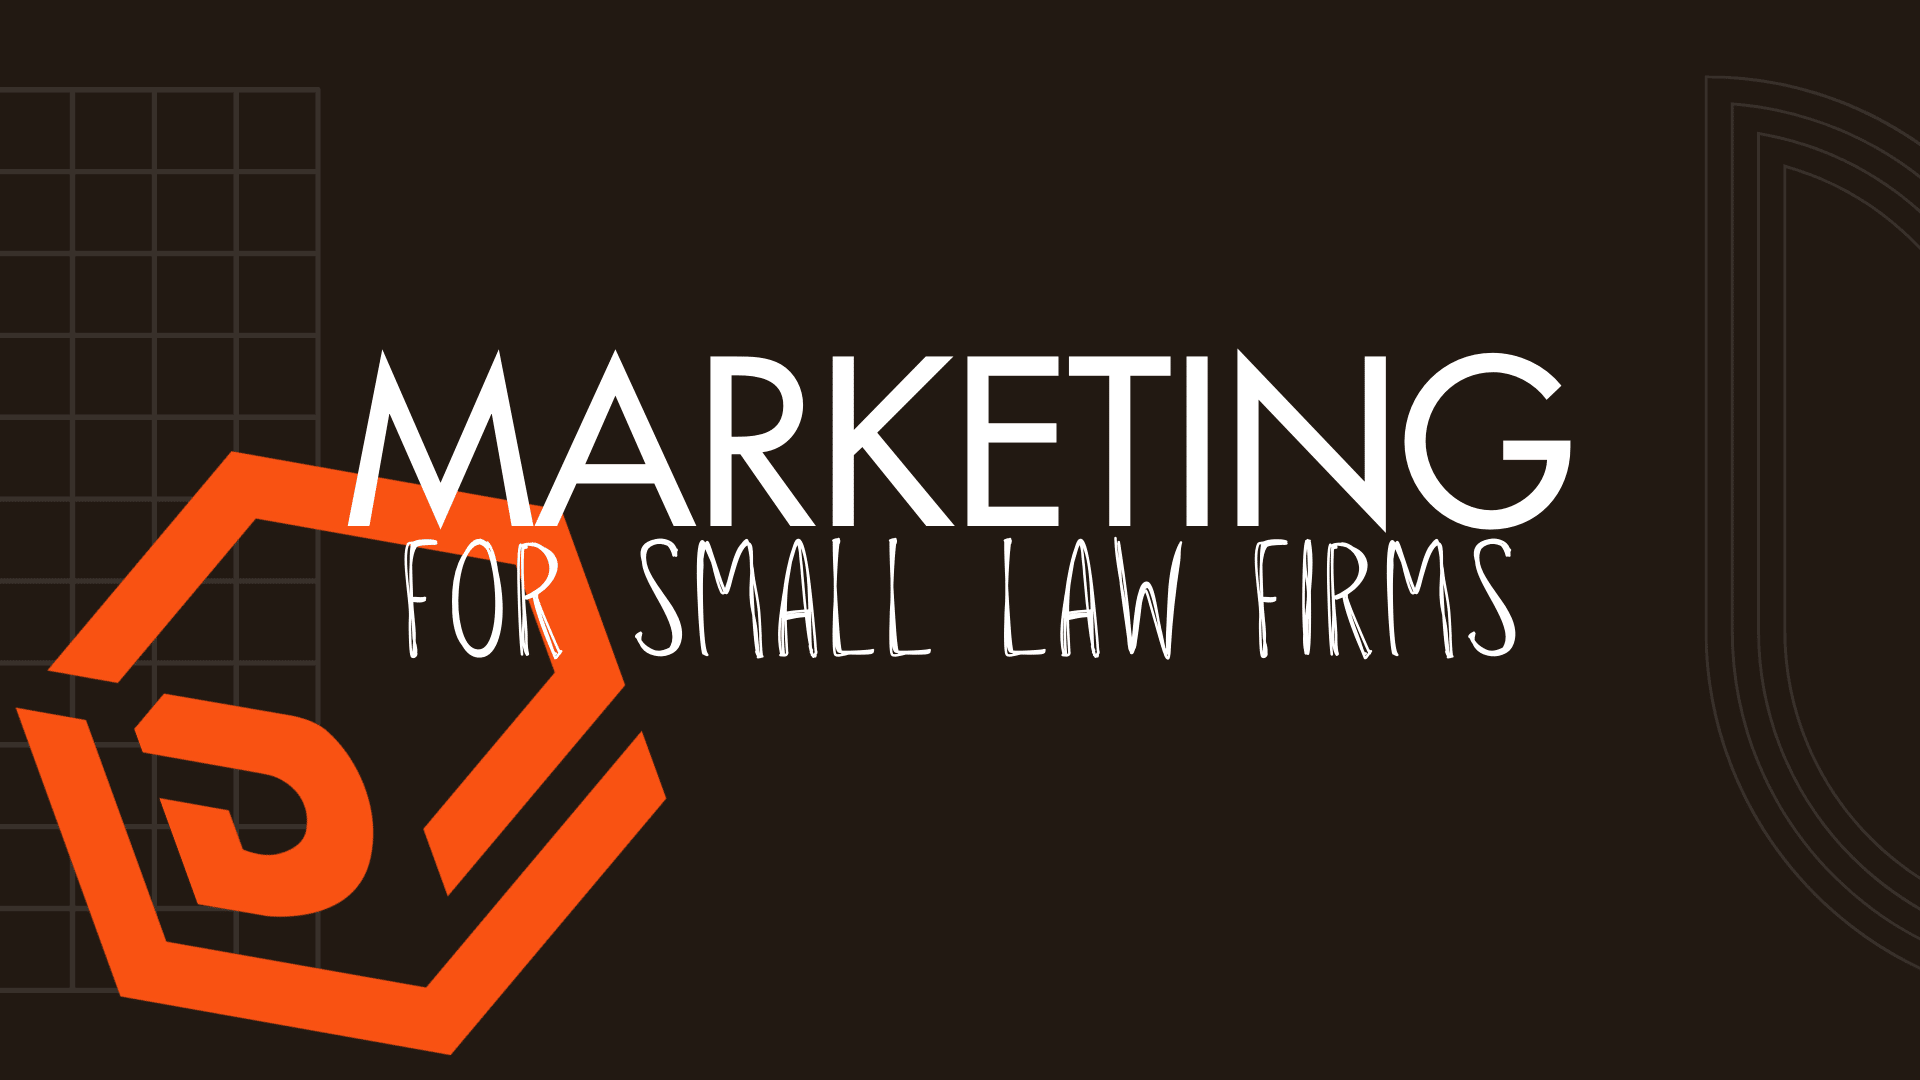 MARKETING for small law firms